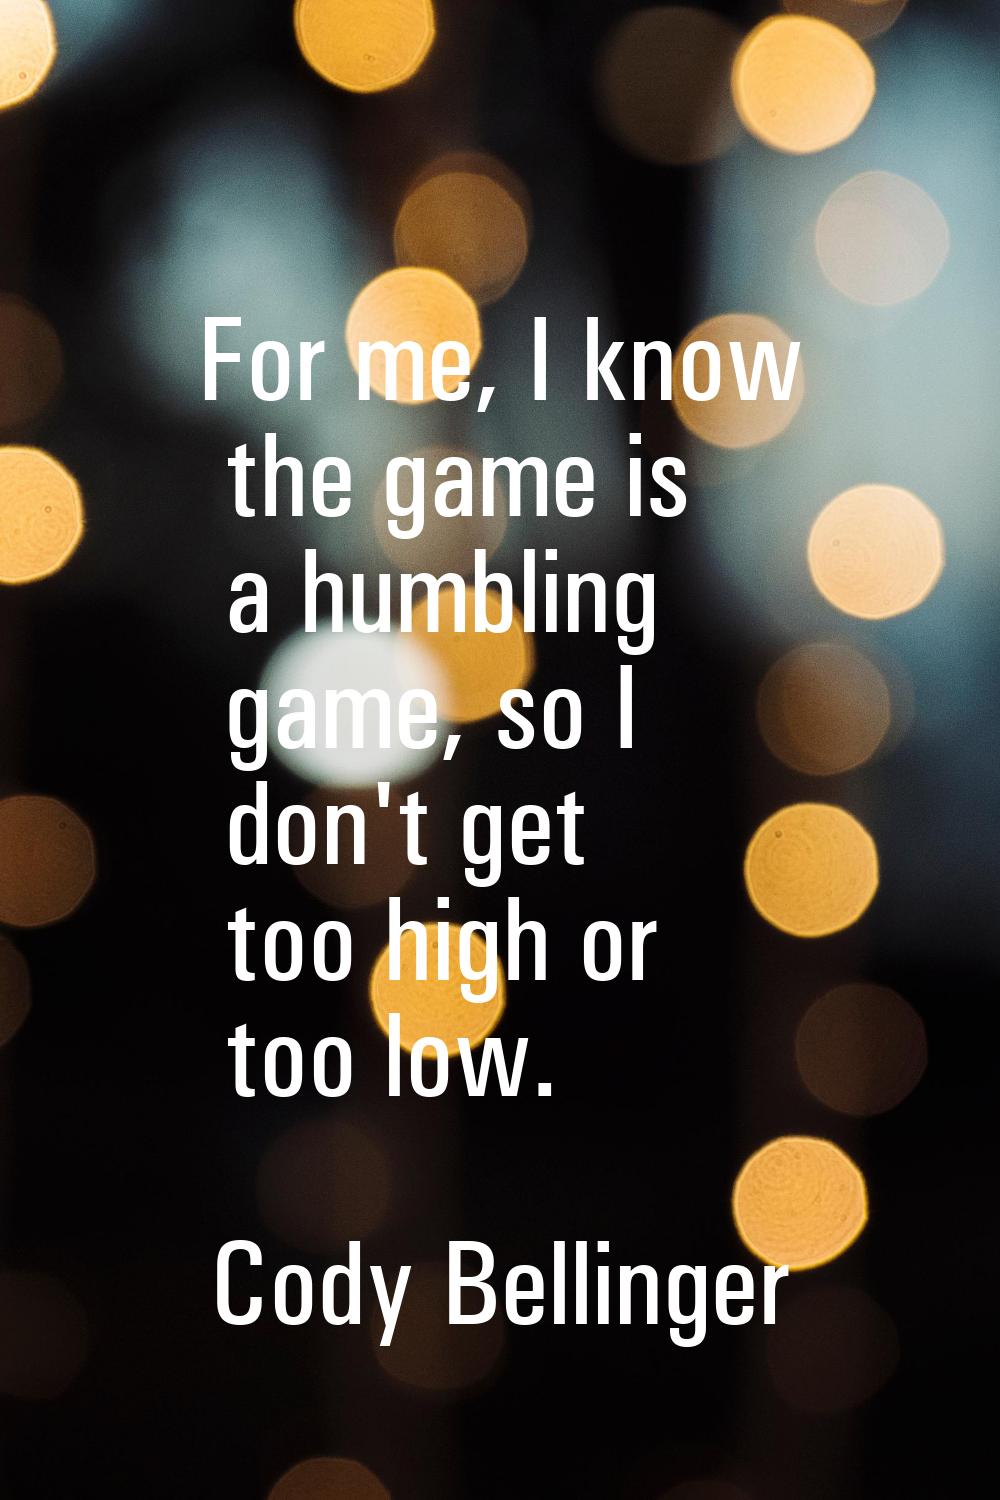 For me, I know the game is a humbling game, so I don't get too high or too low.